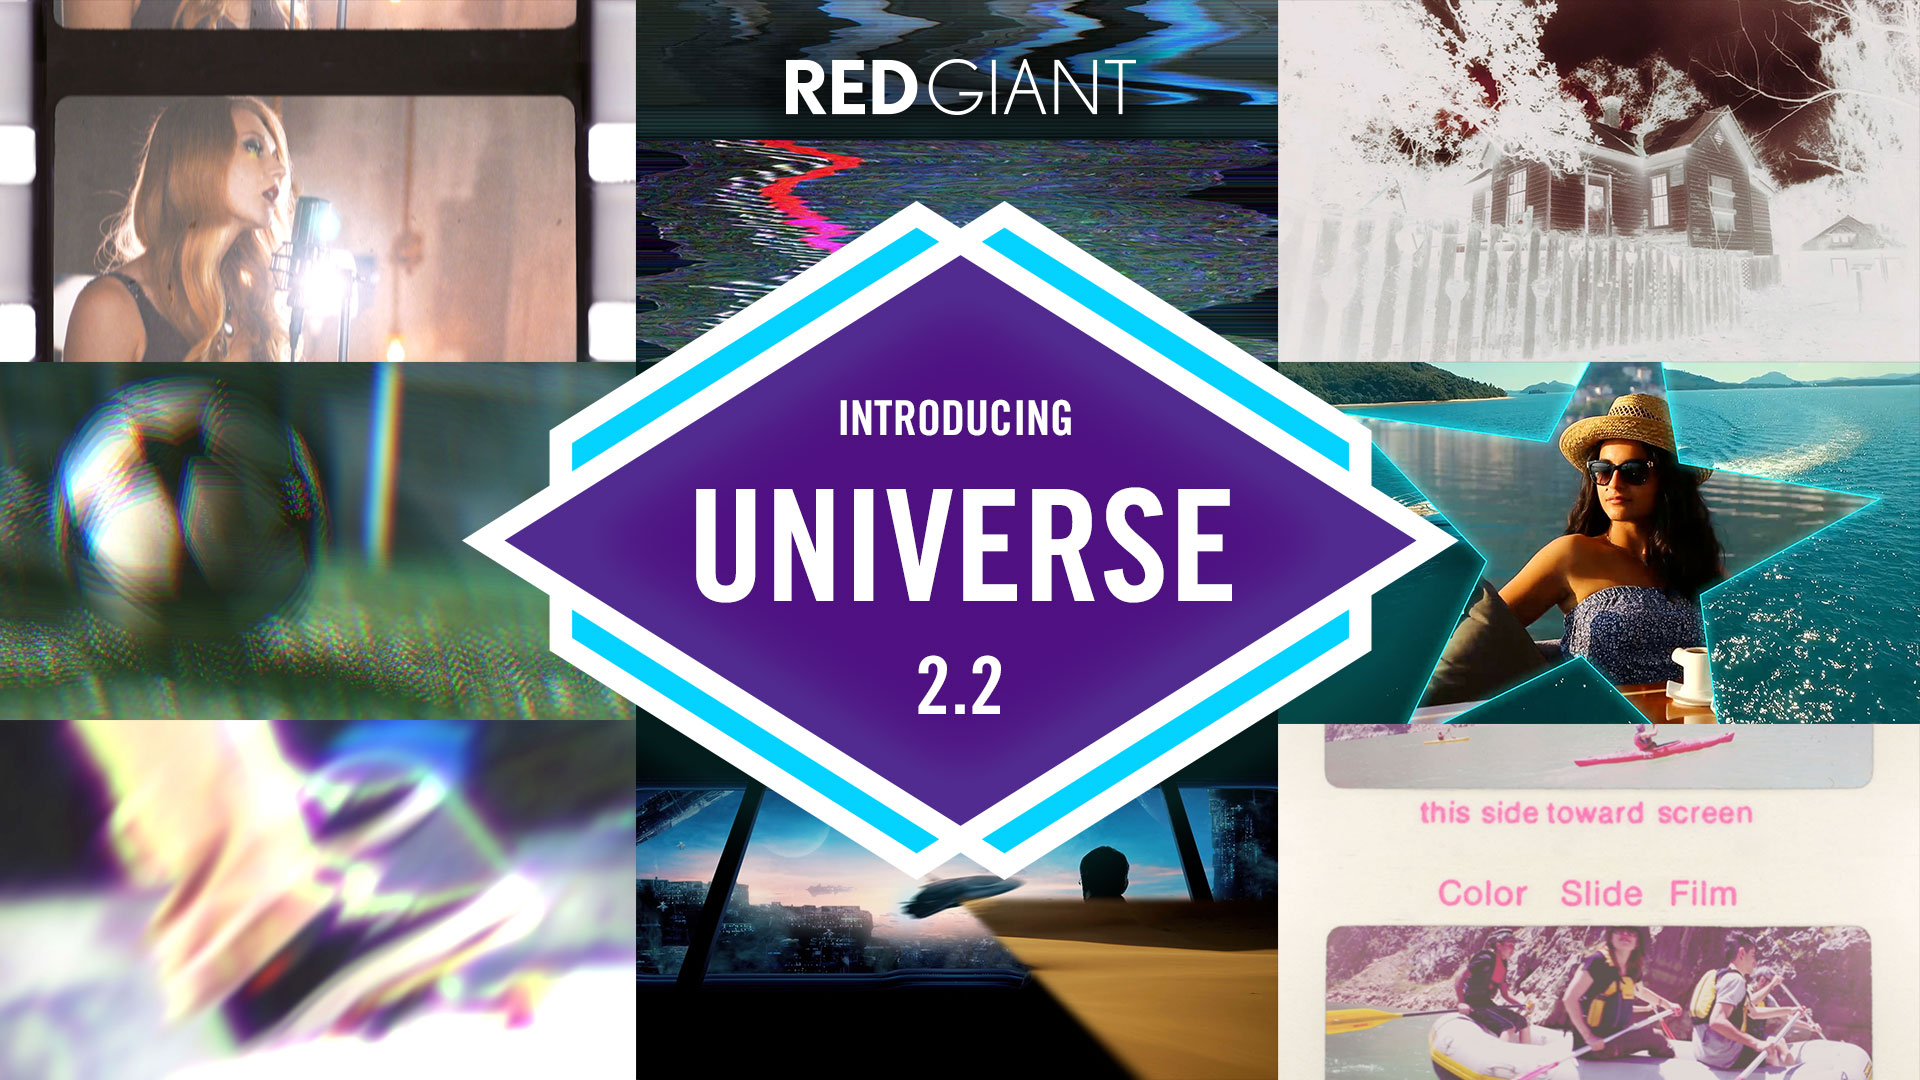 Red Giant Universe 2024.0 for iphone instal